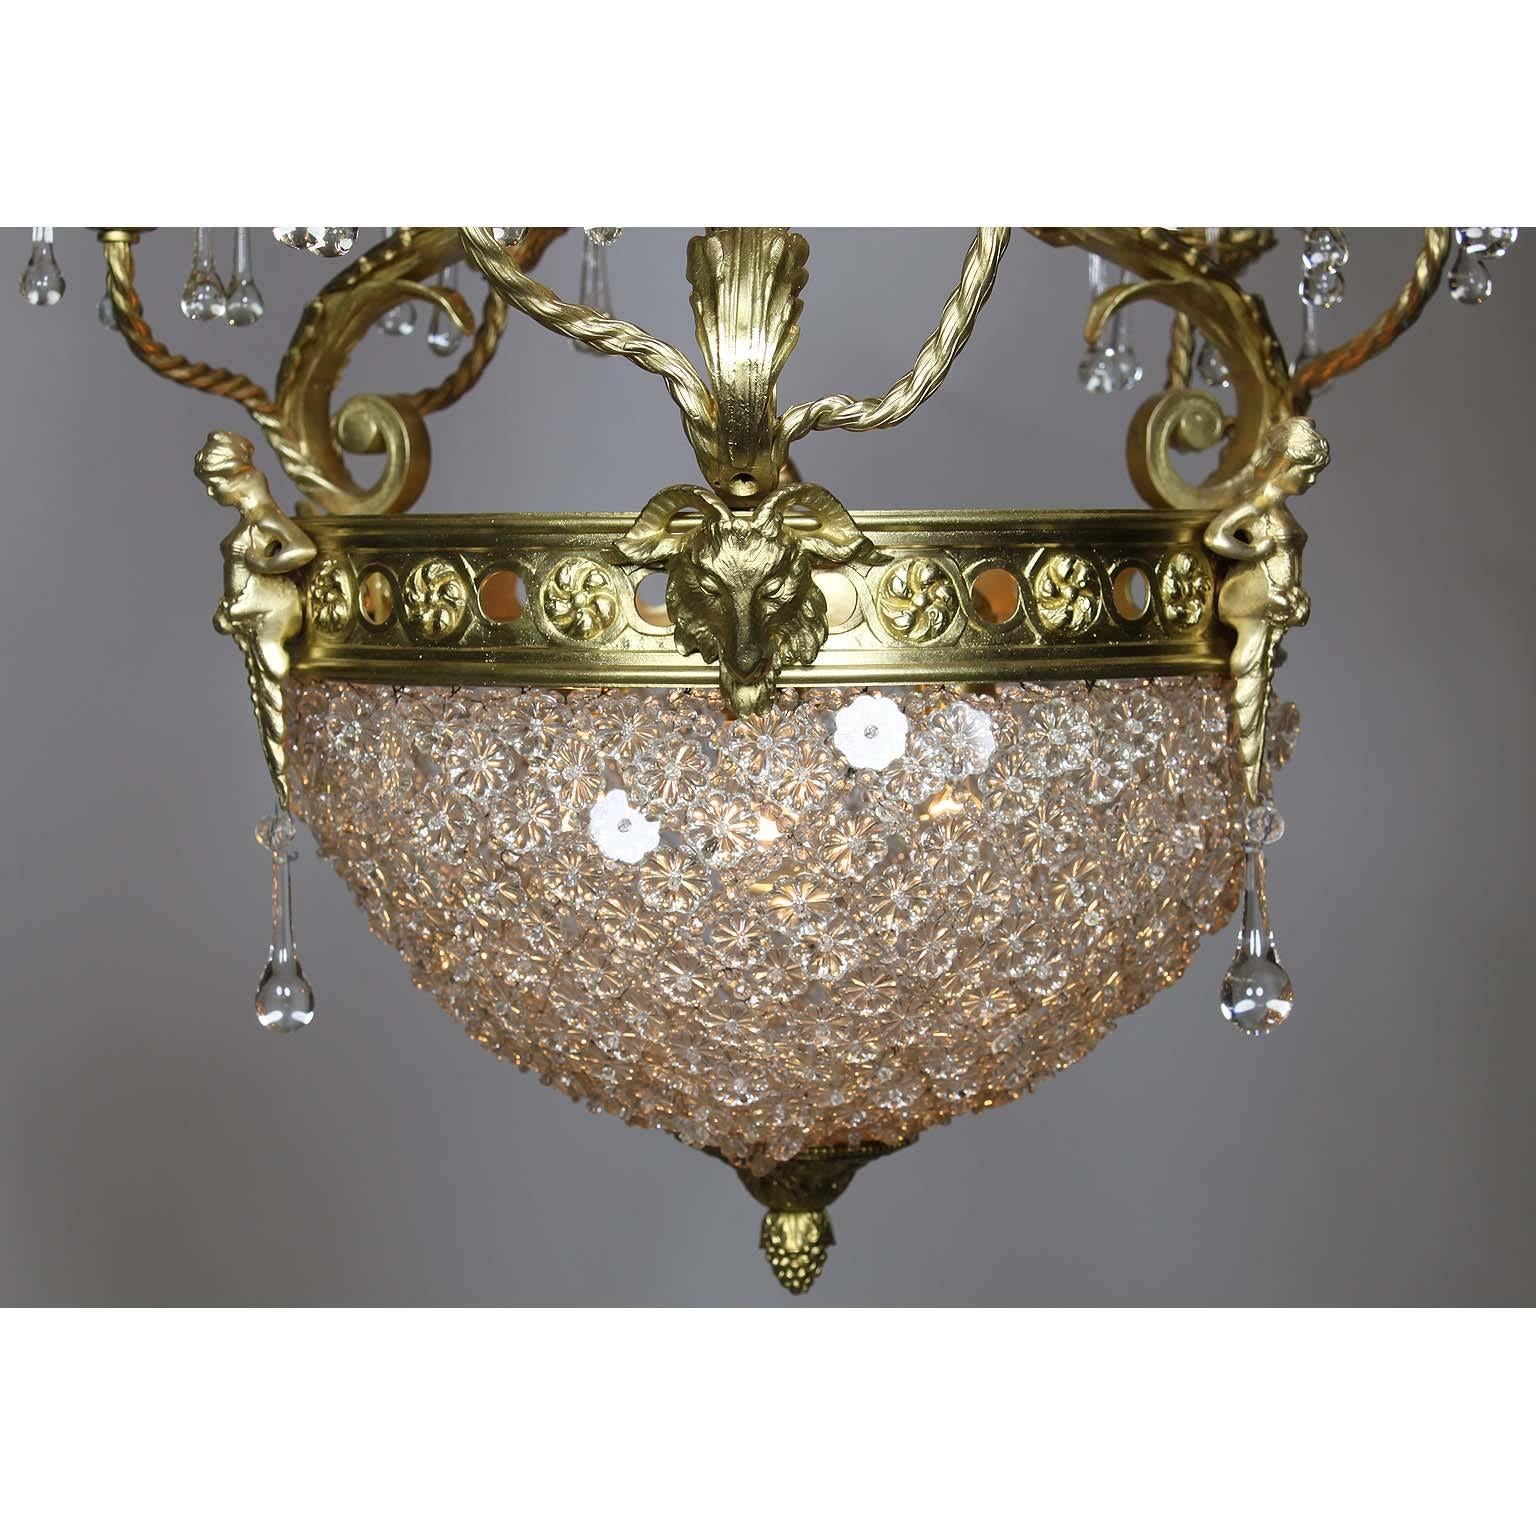 French Belle Époque Gilt Bronze and Cut-Glass Six-Arm Figural Basket Chandelier In Good Condition For Sale In Los Angeles, CA